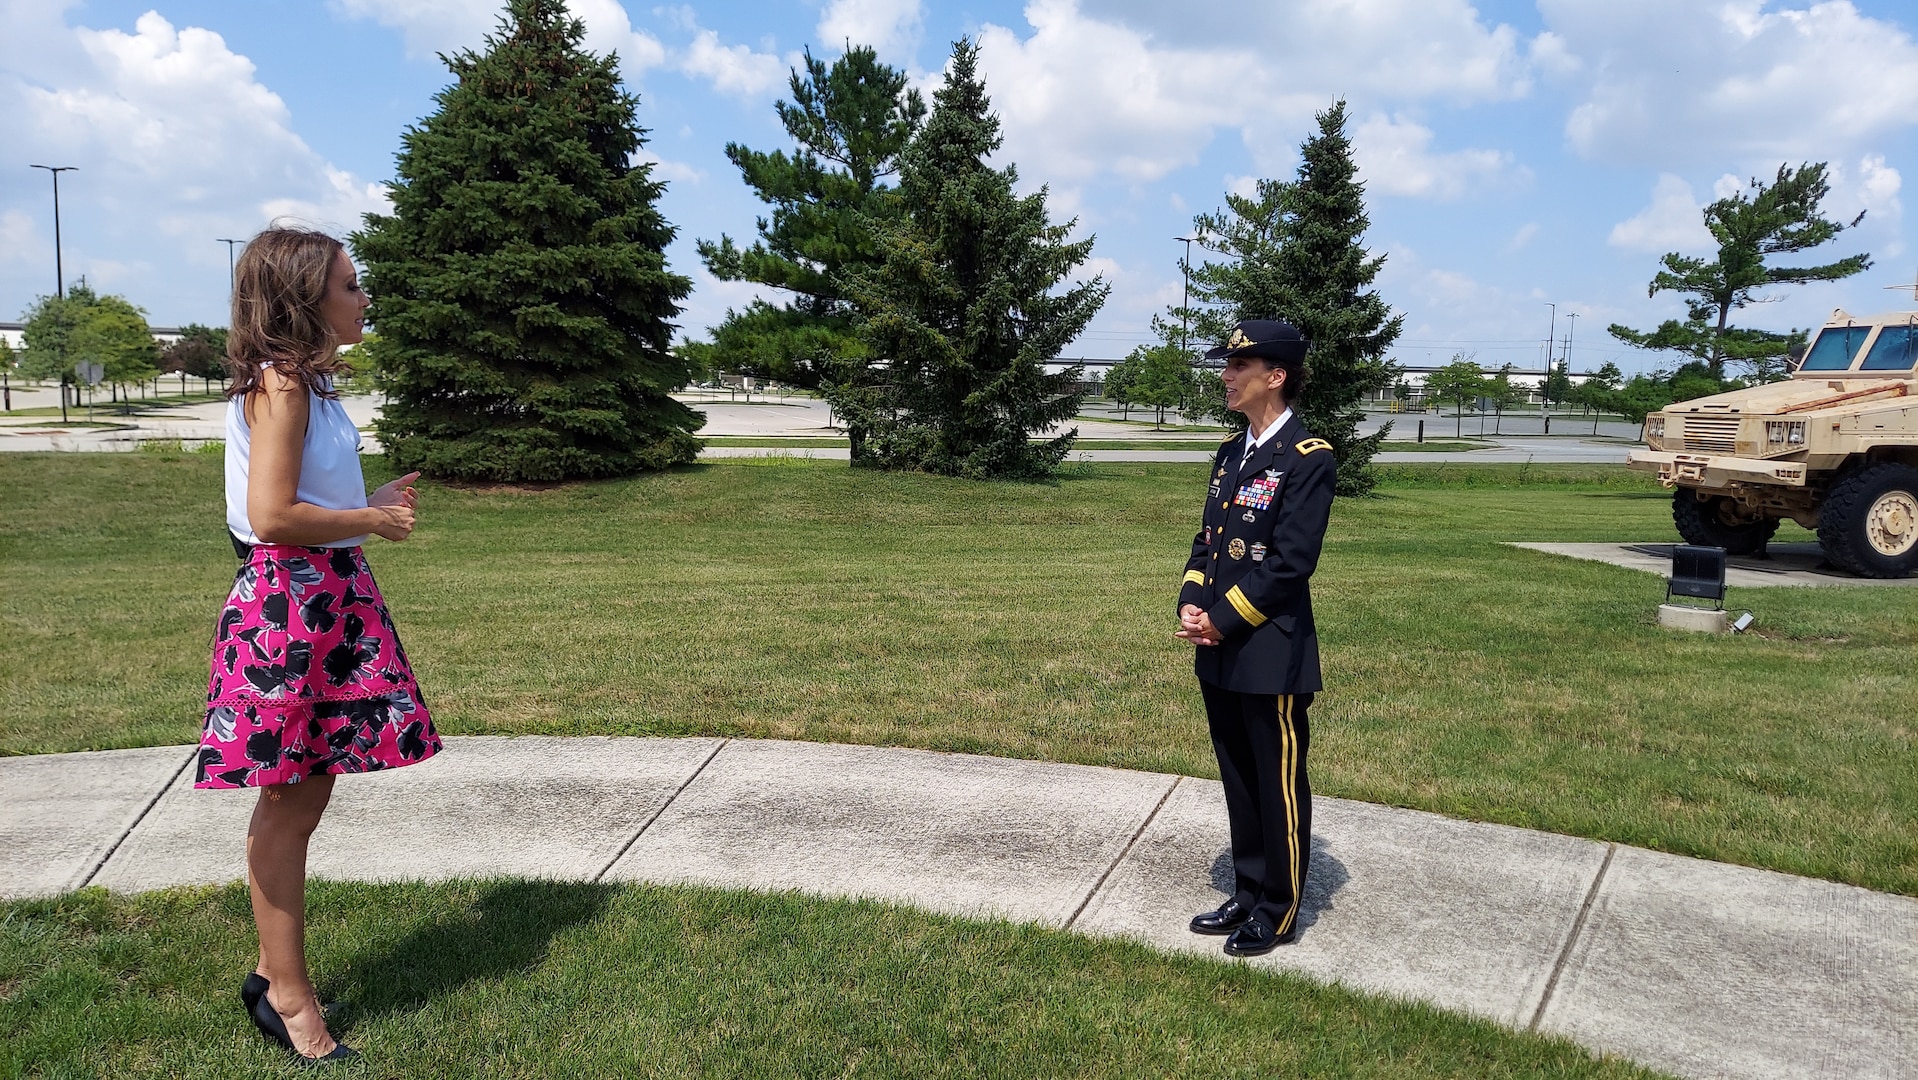 A woman in a white blouse with no sleeves and a pink flowered skirt and high heels stands on grass interviewing a woman in Army dress blues (black uniform with gold stripes, ribbons and medals and a black gold trimmed hat). She wears the dress pants with gold trim and black shiny shoes. She stands on a white sidewalk in a park with trees and military equipment. Part of a brown military vehicle can be seen behind her.